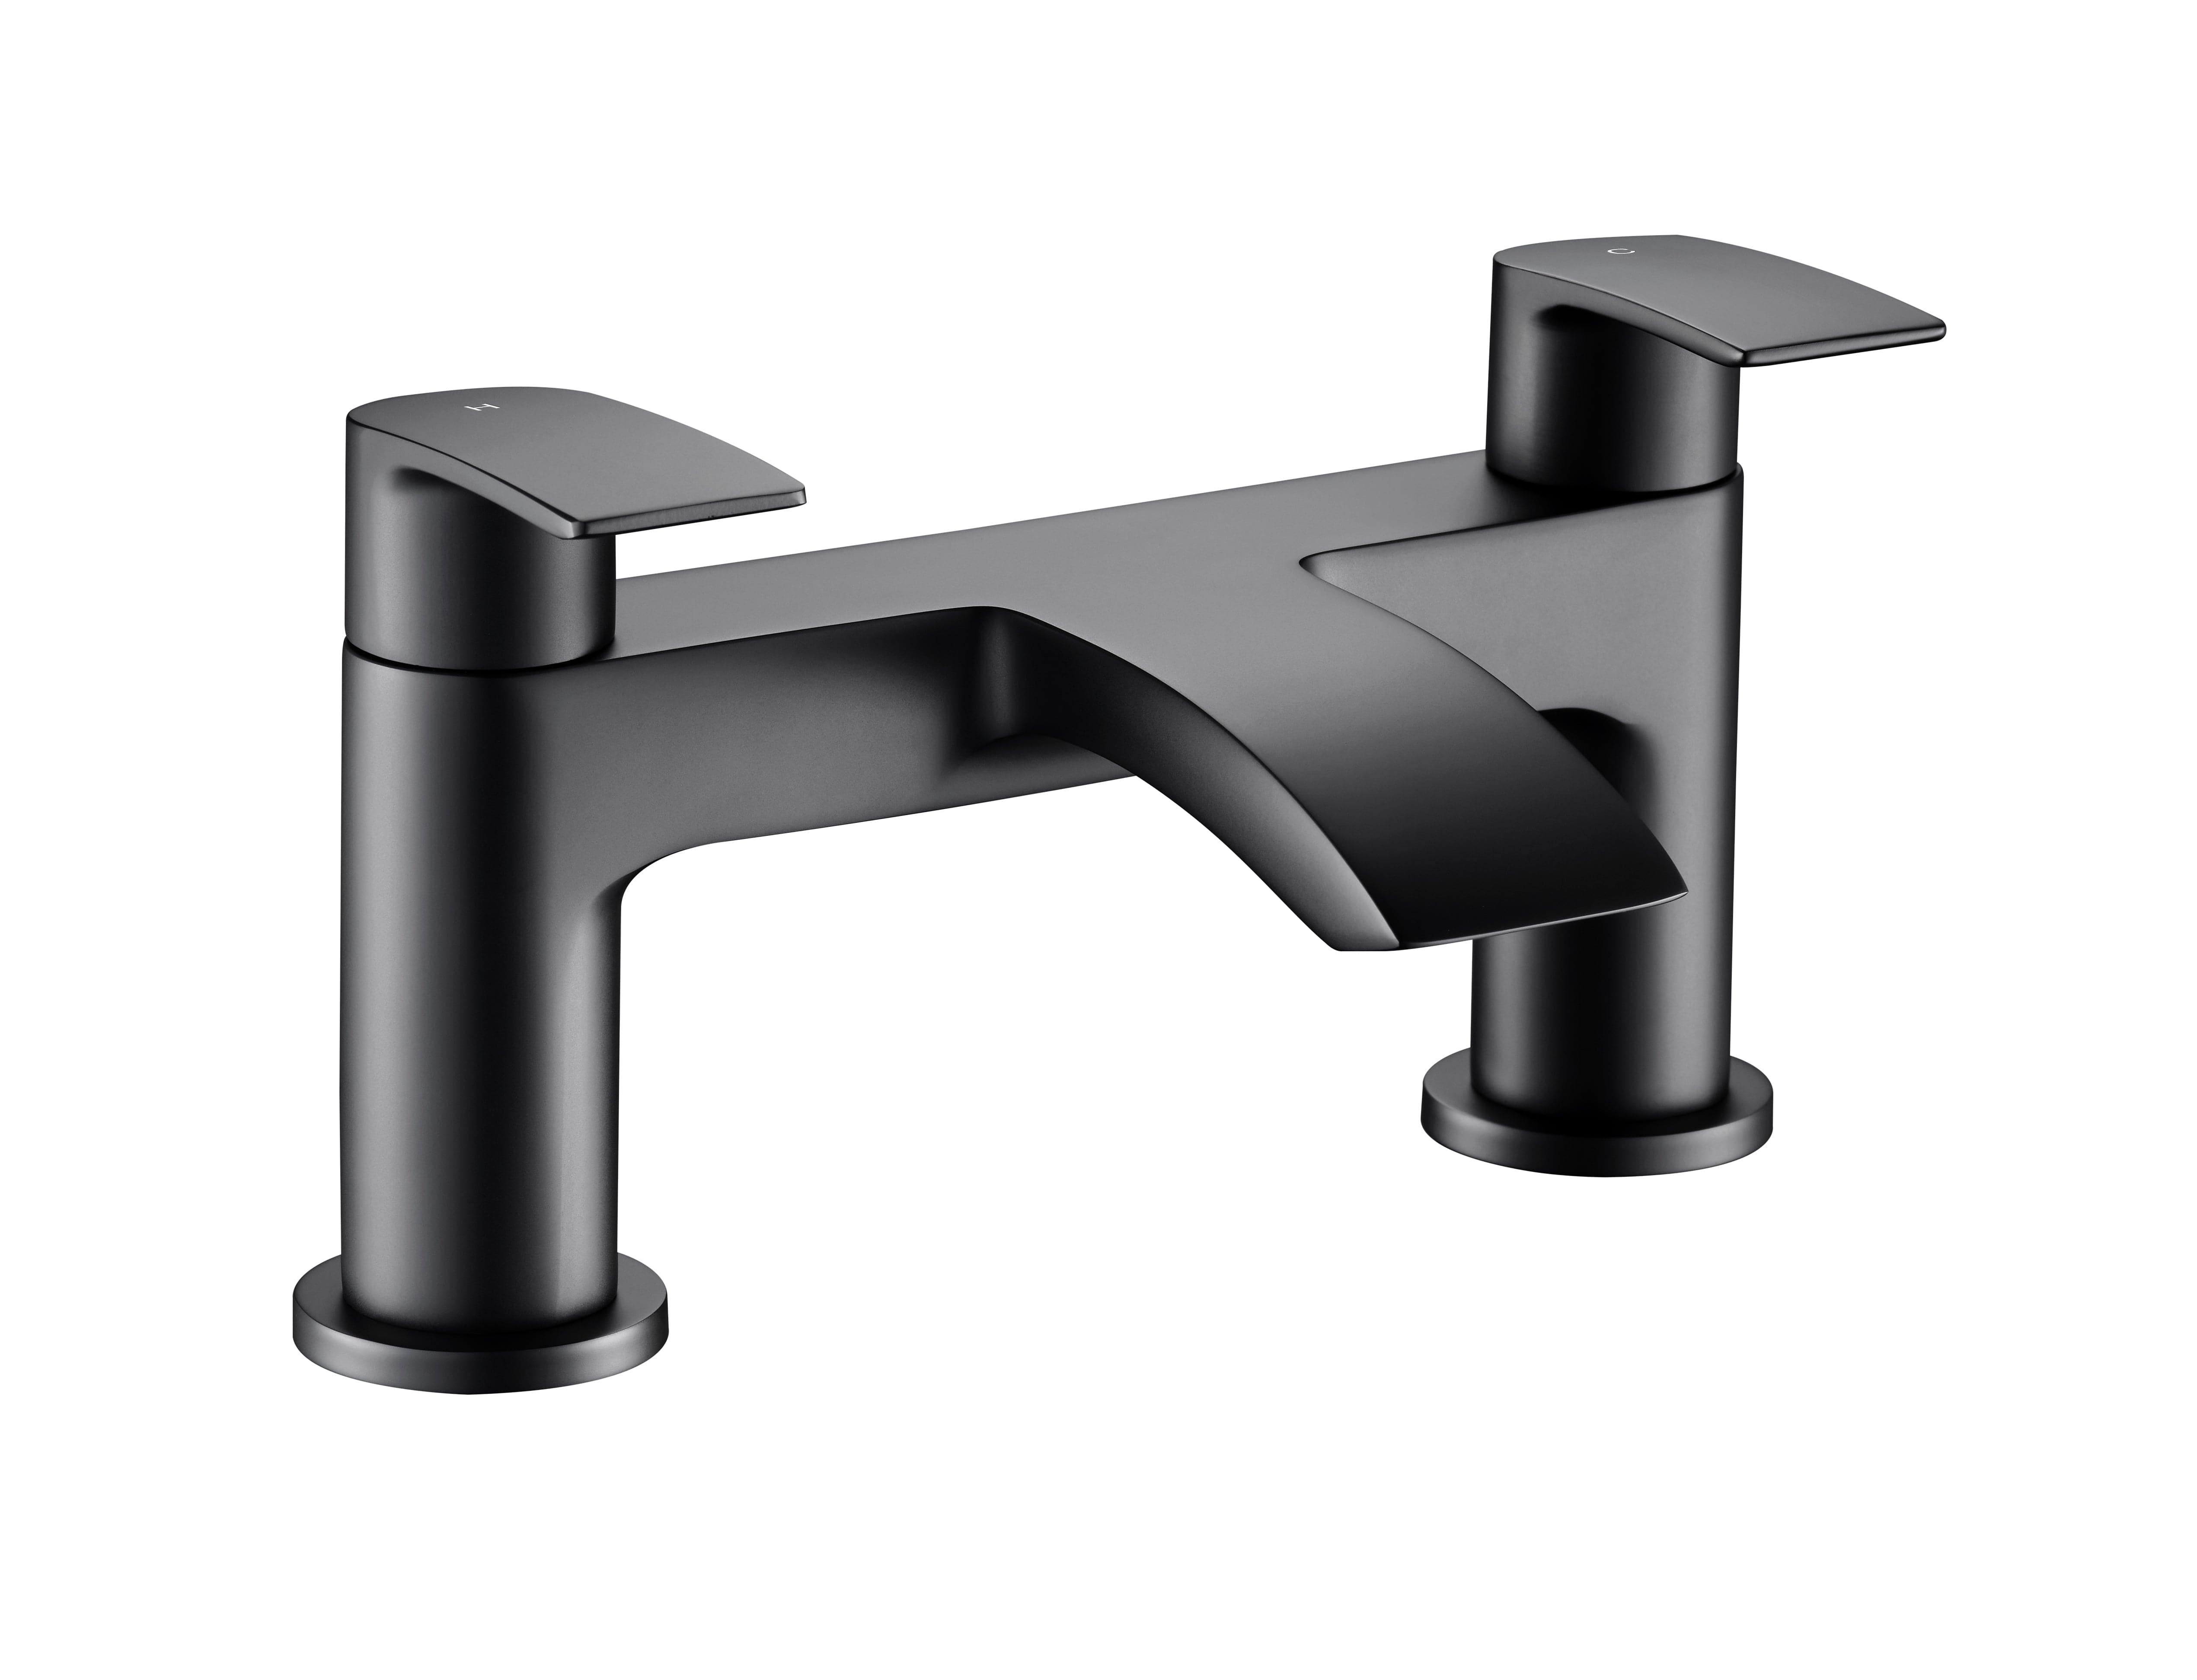 Carter Bath Filler Tap in Matt Black finish, modern and stylish, perfect for contemporary bathrooms. Ideal for luxury and functionality. Shop now at Bathroom4less.